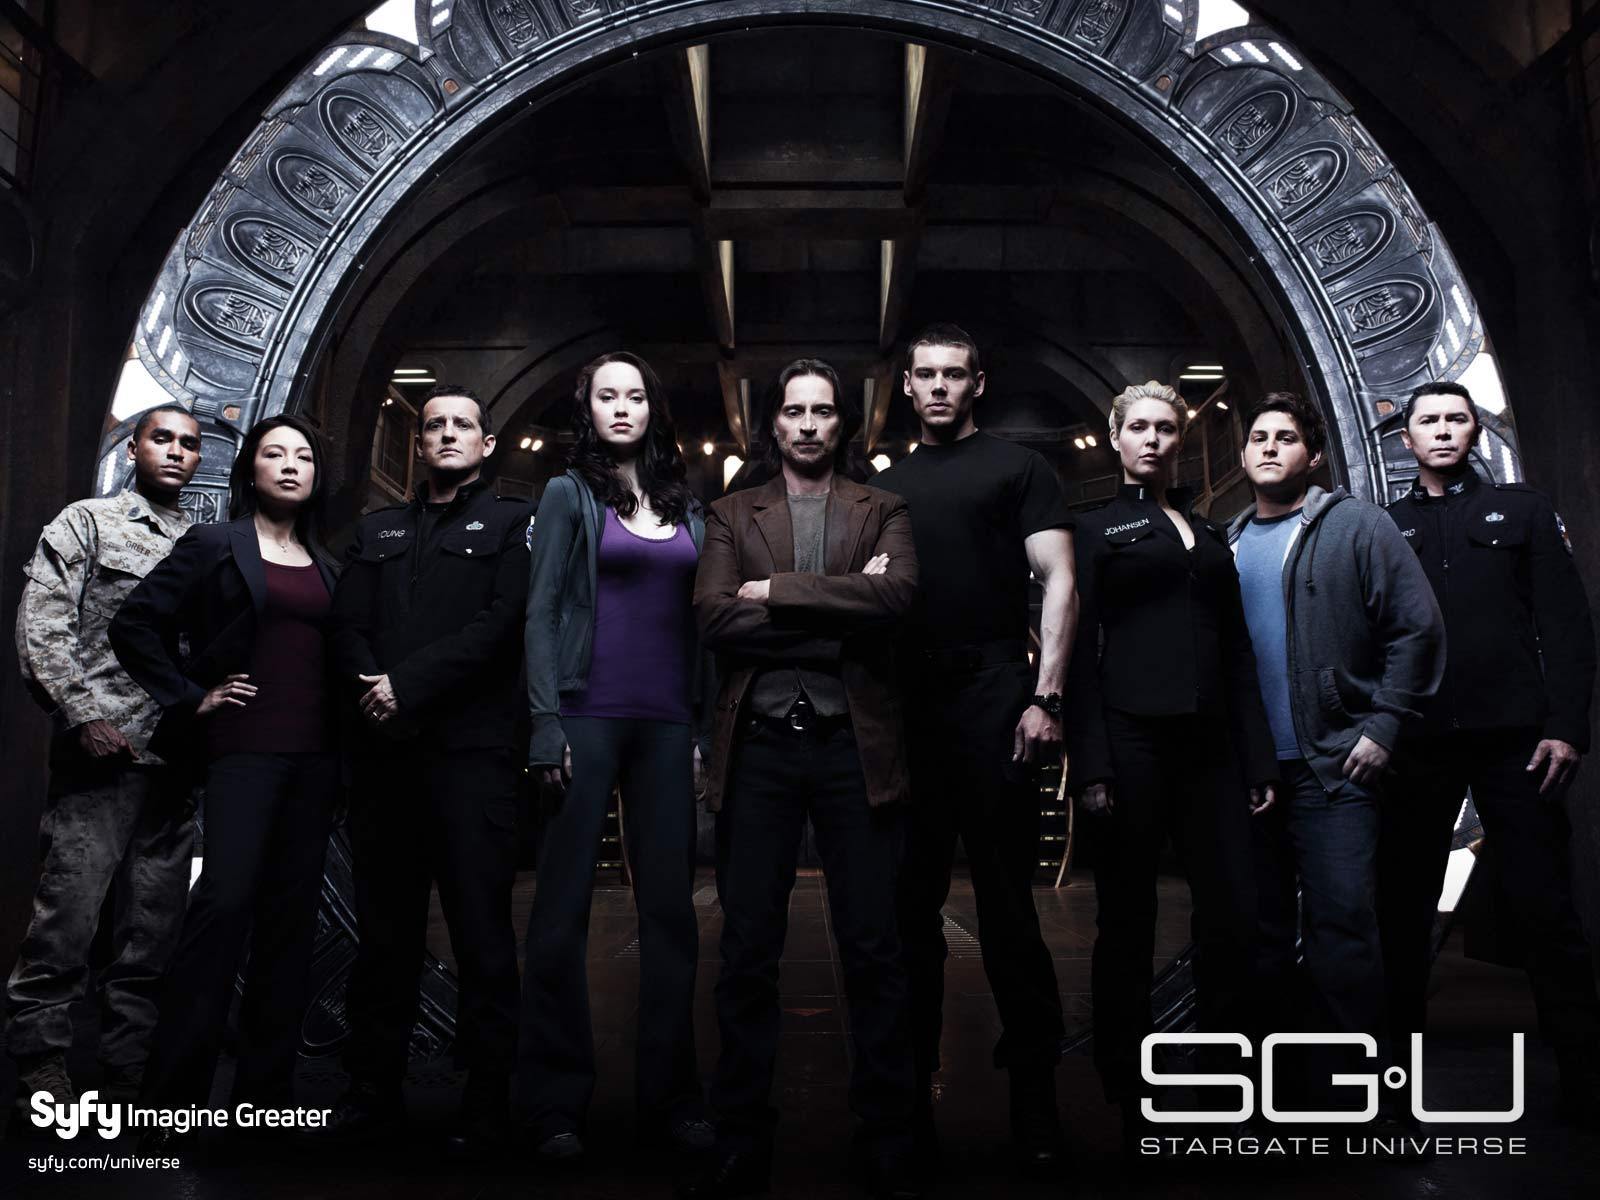 The Stargate TV and Movie Conspiracy: Stargate Atlantis, SG-1, and ...